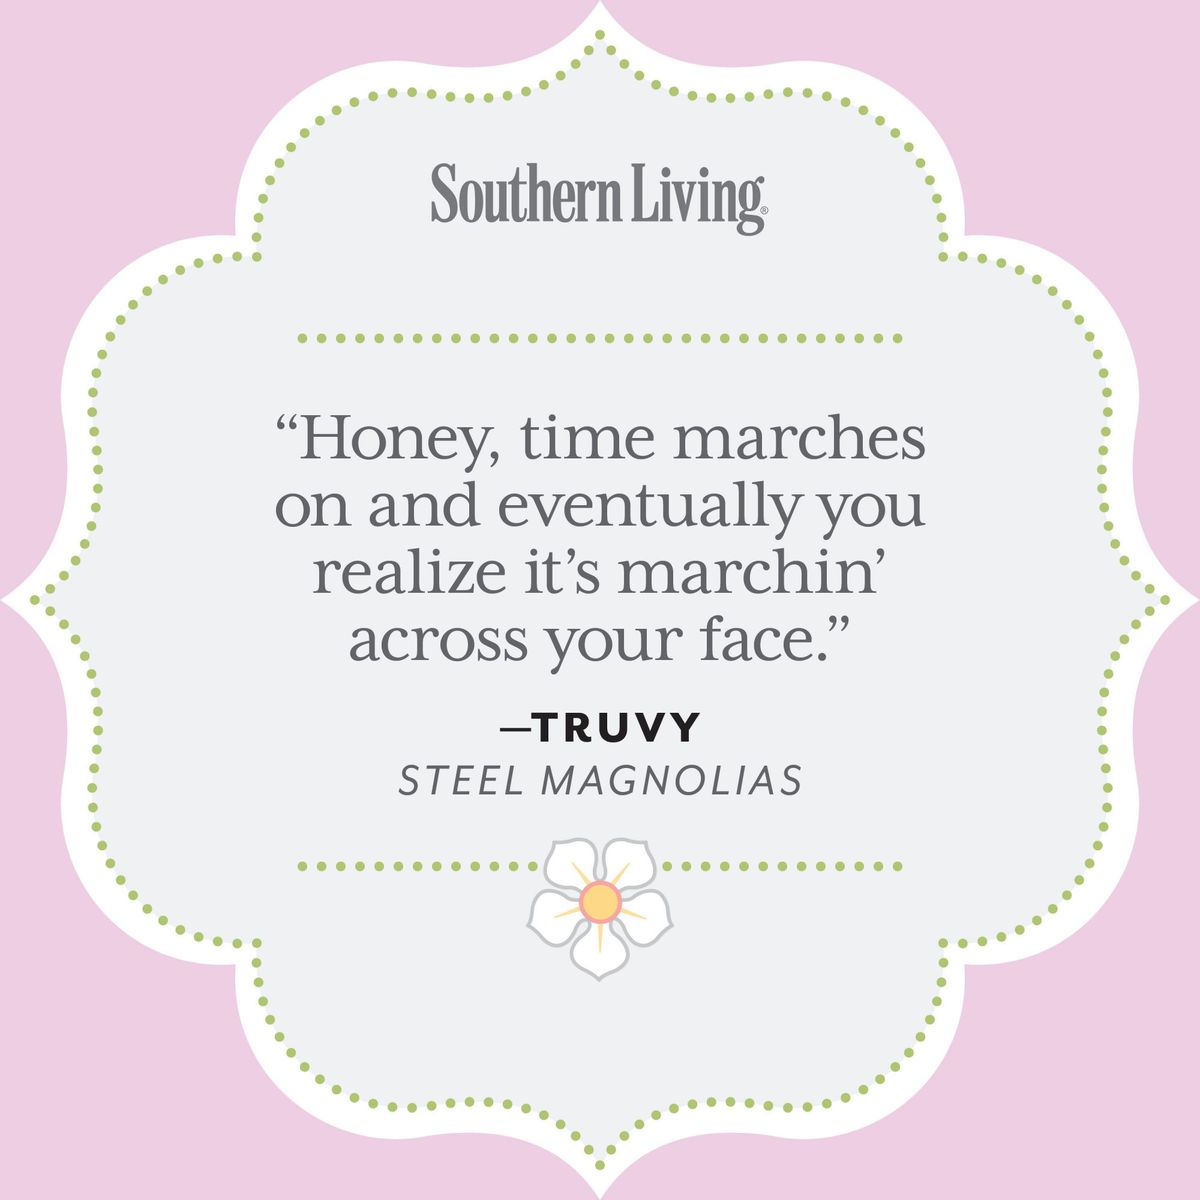 Honey, time marches on and eventually you realize it's marchin' across your face.